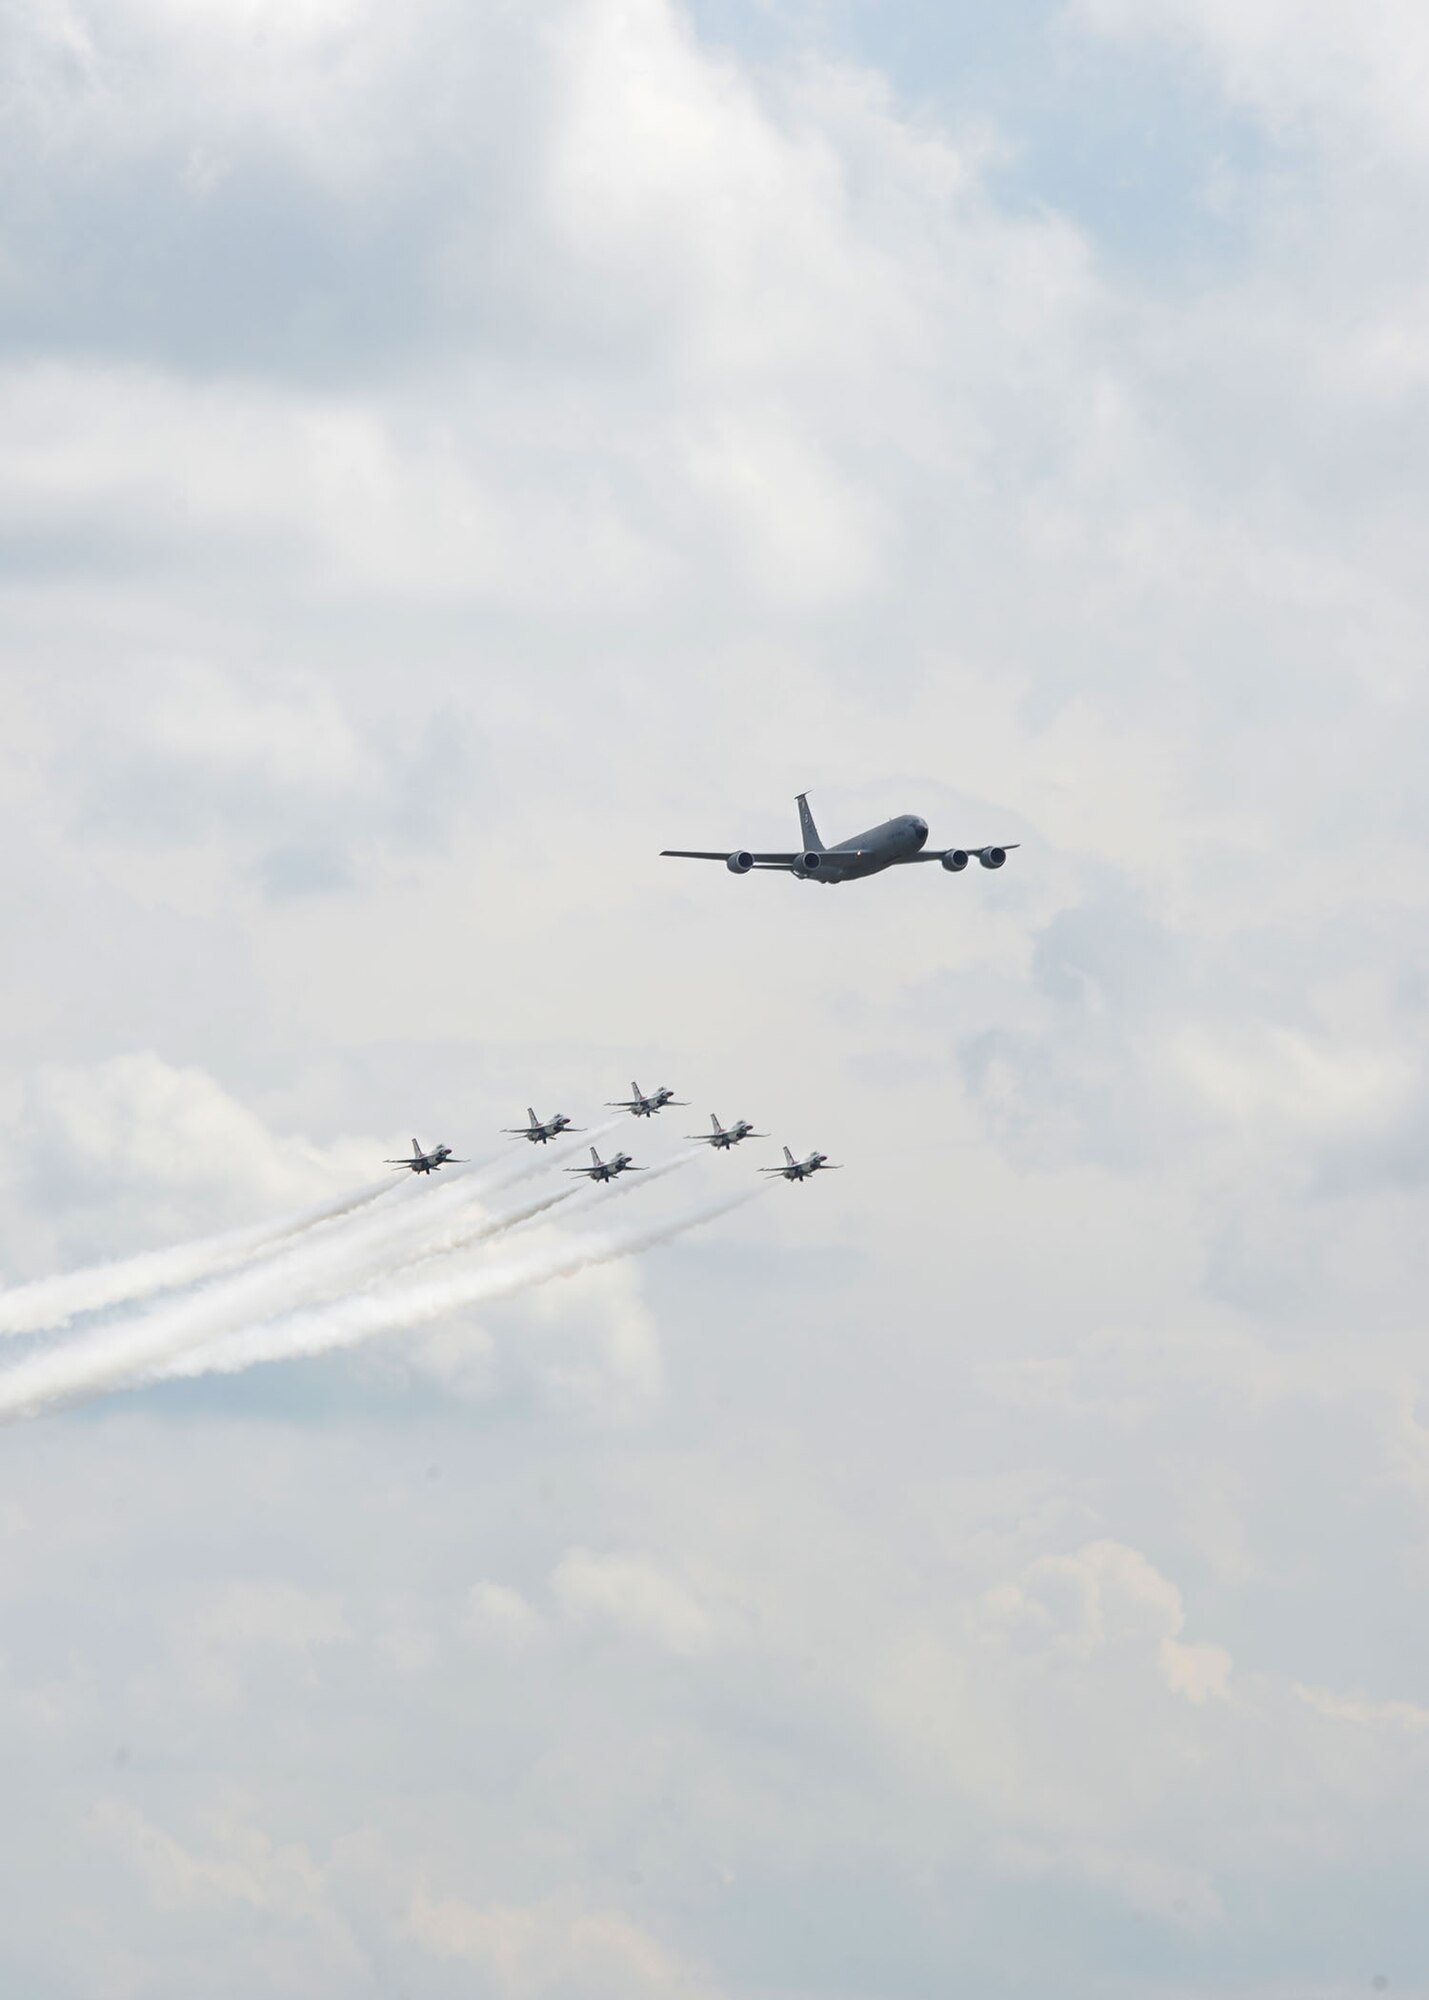 A KC-135 Stratotanker from the 100th Air Refueling Wing leads the U.S. Air Force Thunderbirds as they fly in formation July 10, 2017, over RAF Mildenhall and RAF Lakenheath, England. The elite flying display team were in the area on their way to the Royal International Air Tattoo at RAF Fairford, and practice for Bastille Day events in France. (U.S. Air Force photo by Karen Abeyasekere)